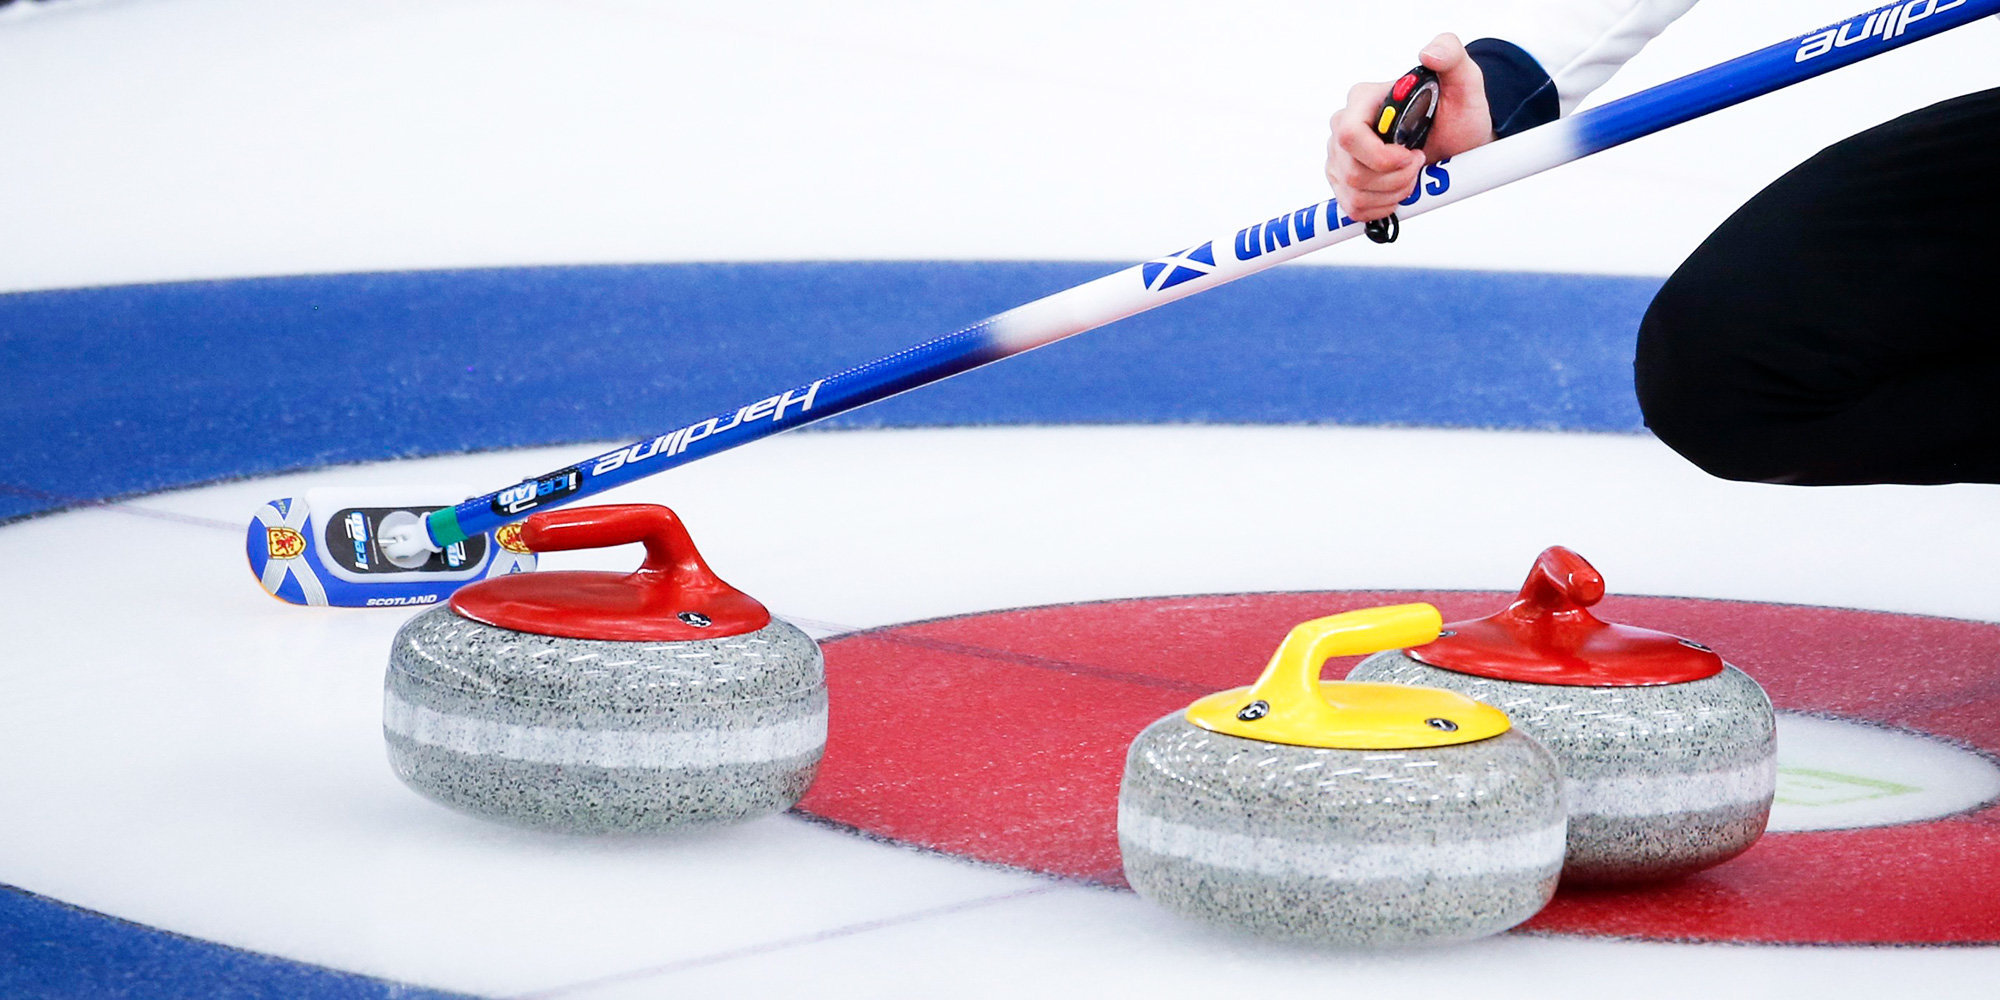 Curling - A sporting game on ice